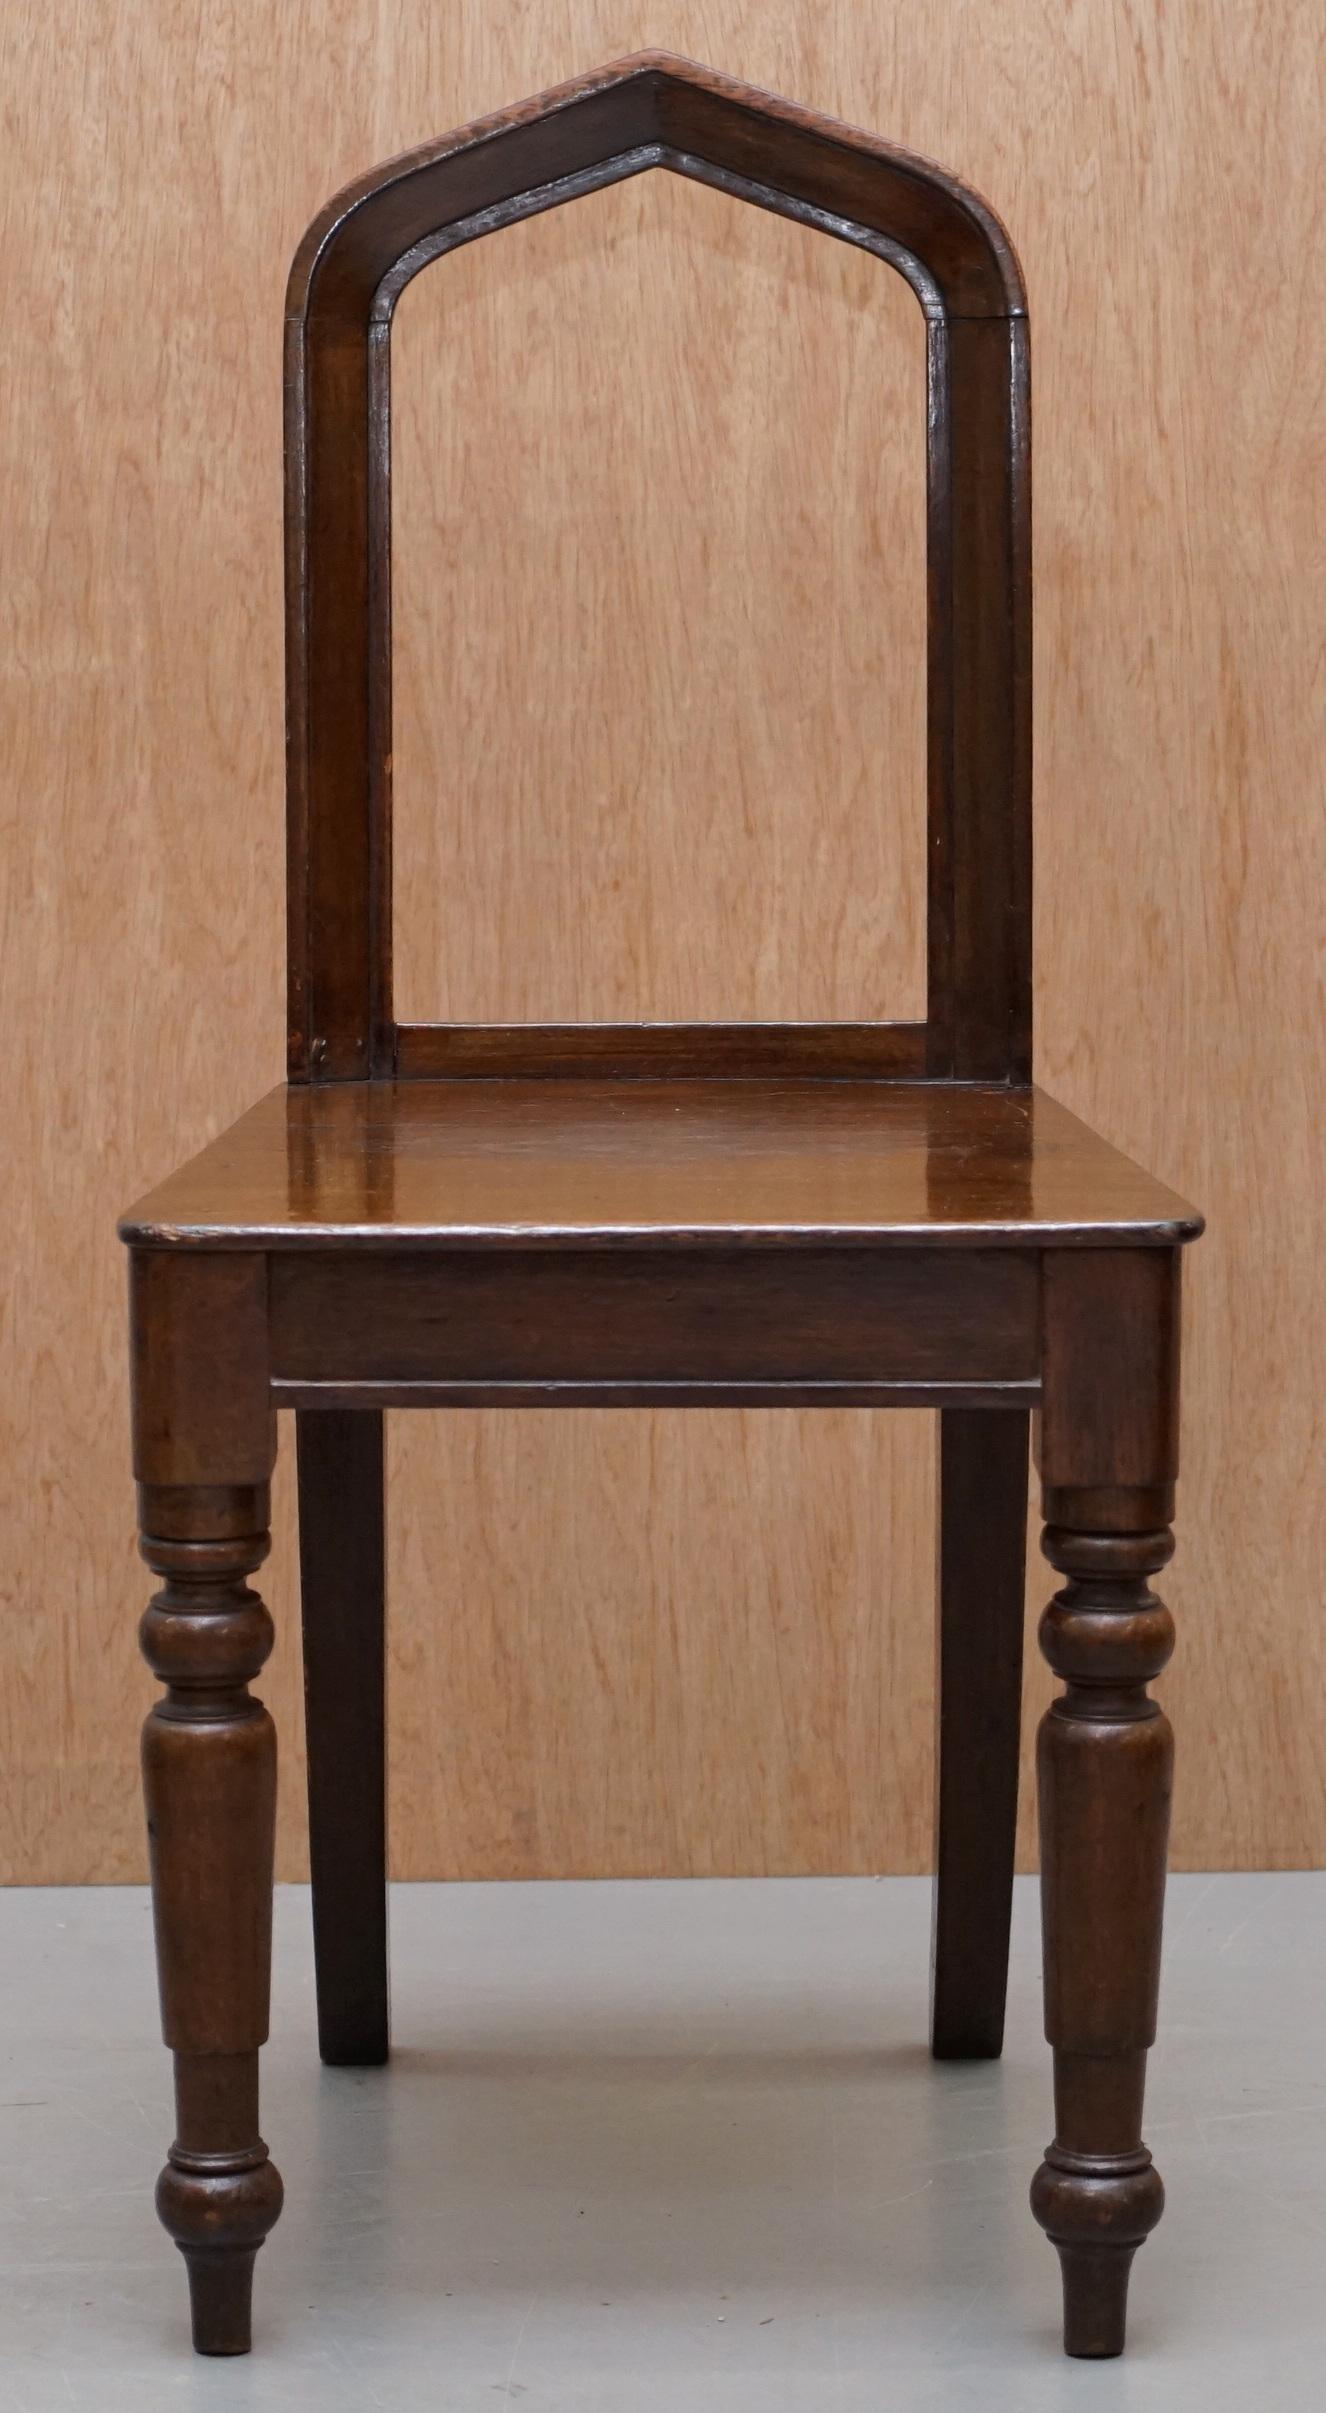 arch dining chair